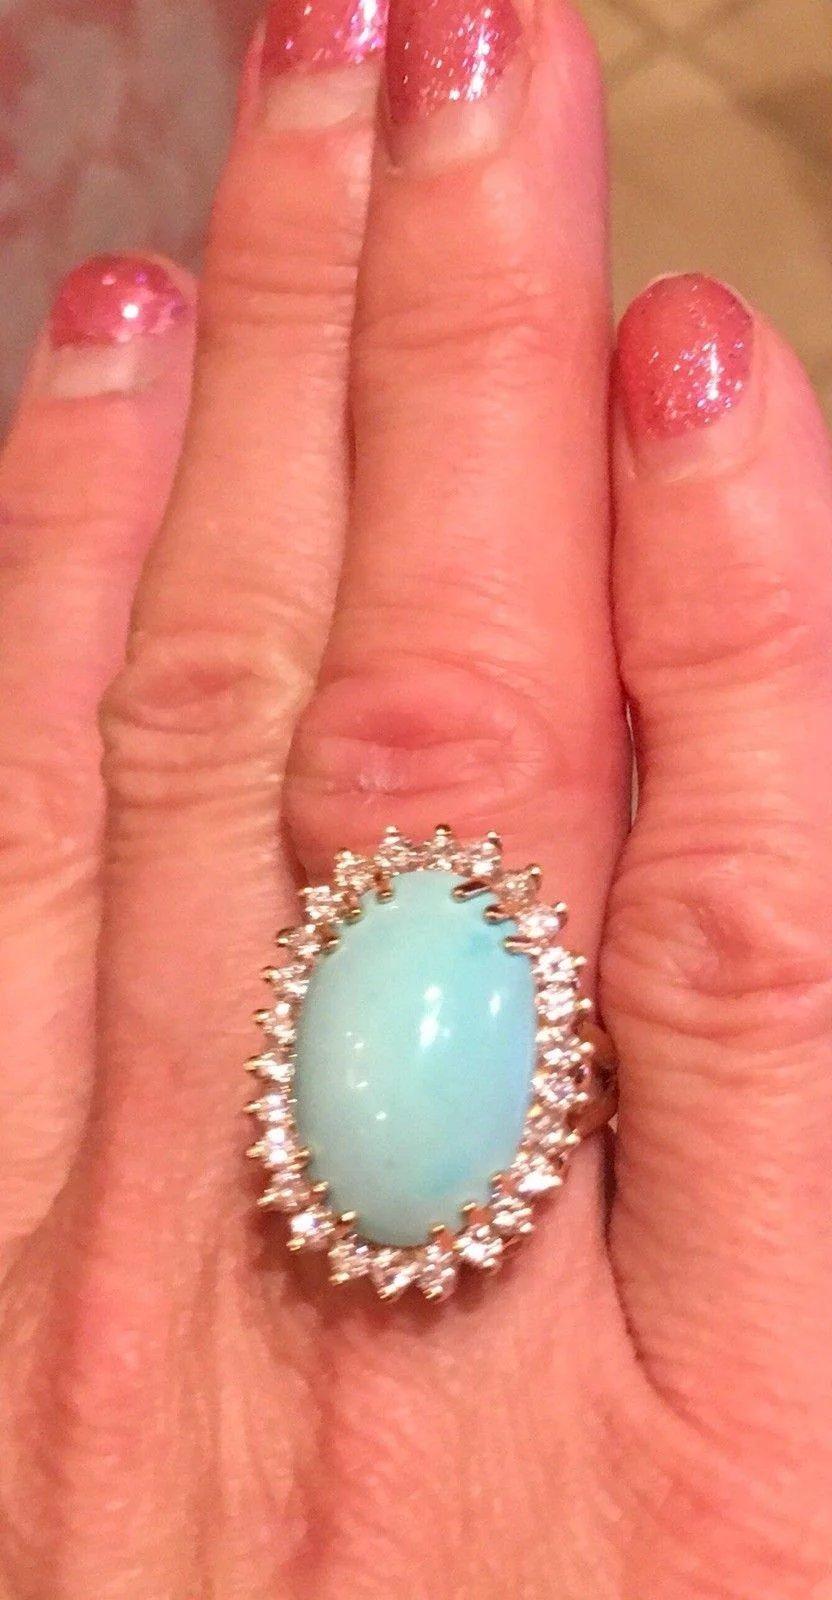 Gorgeous vibrant 14K yellow gold cocktail ring featuring an oval turquoise cabochon and 24 white colorless round brilliant diamonds with VS-SI1 clarity, totaling approximately 1.08 carats.

The ring is marked 14k gold on the inside shank.

The